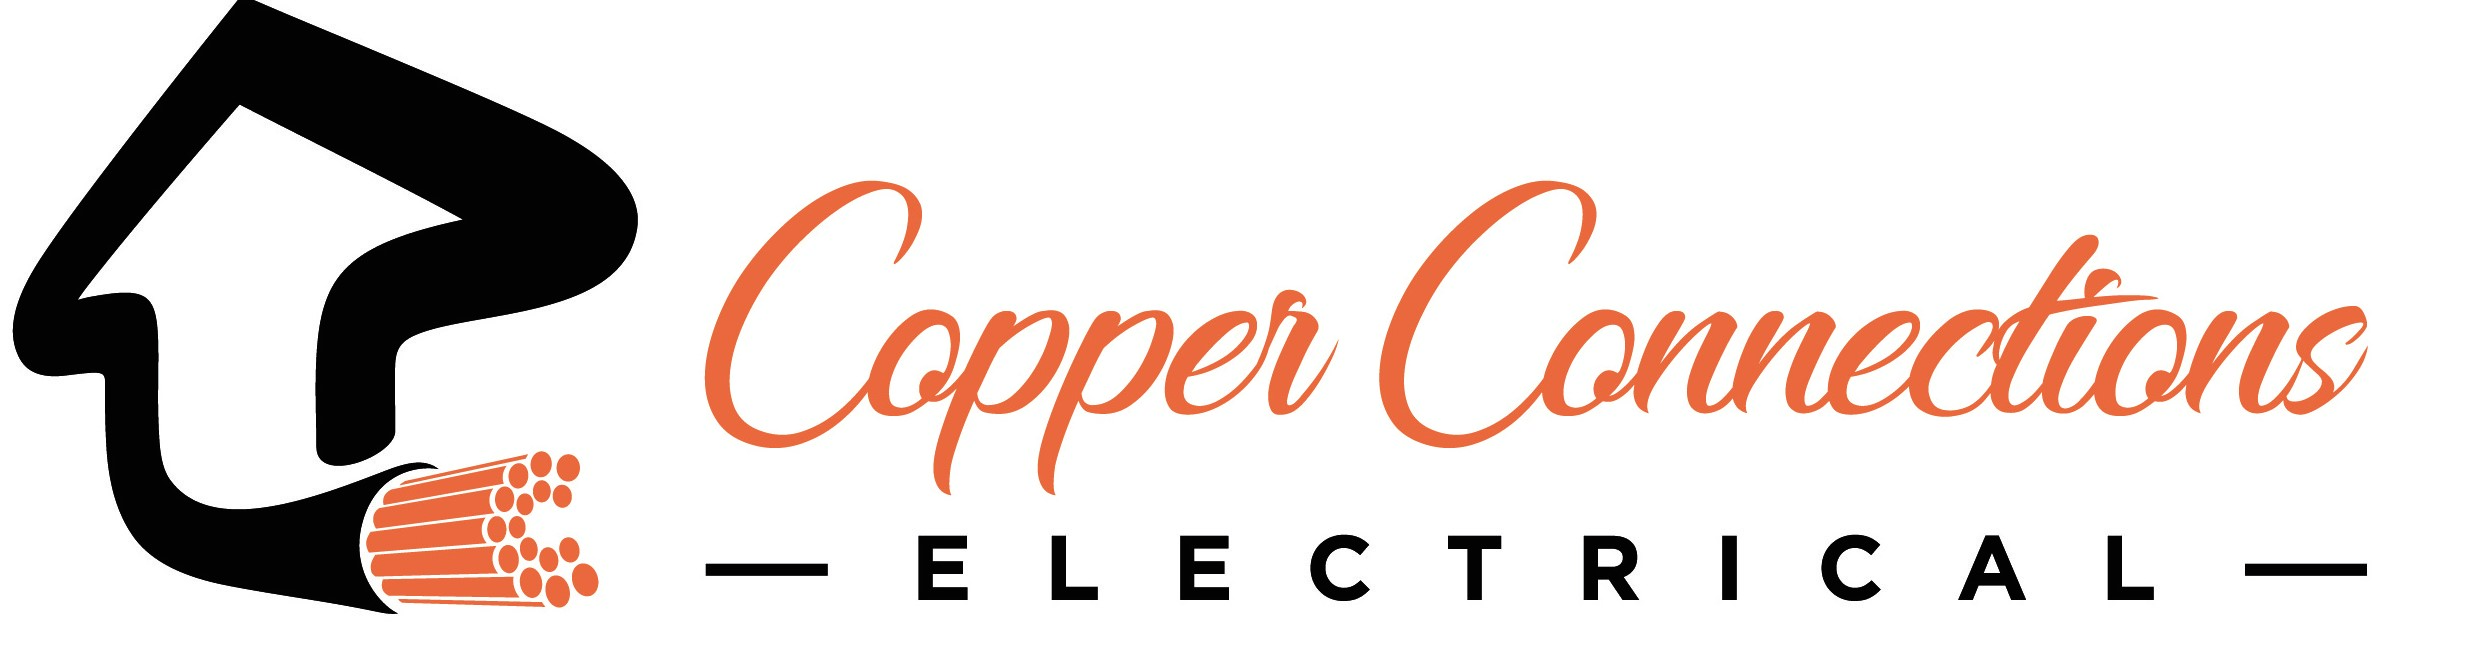 Copper Connections Electrical, Inc. Logo